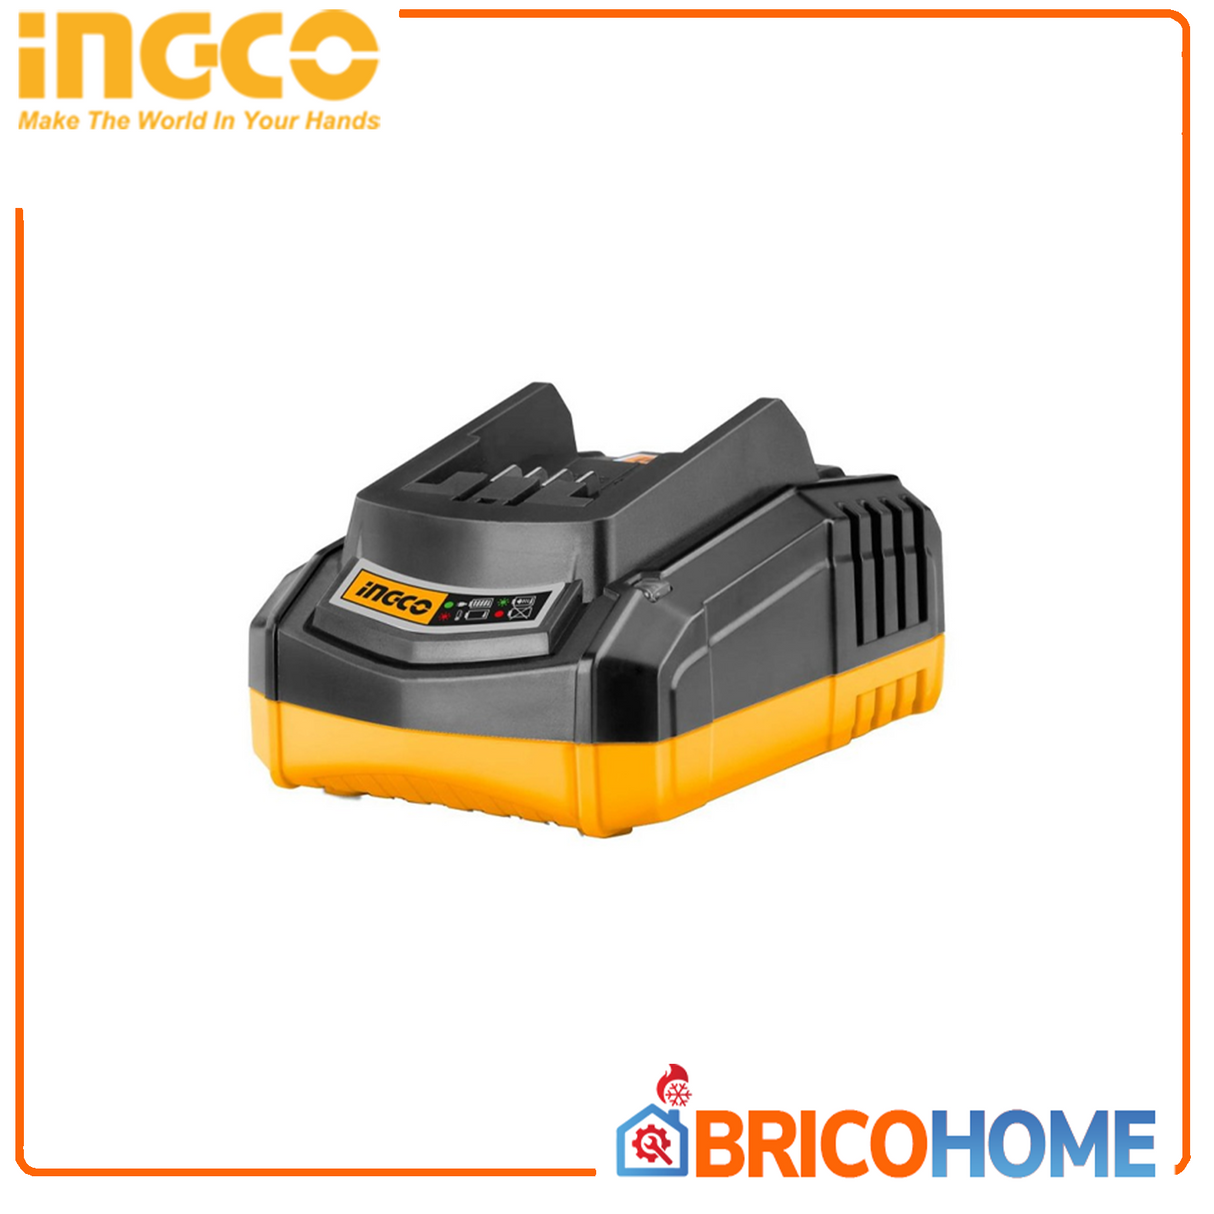 INGCO 20V quick charger